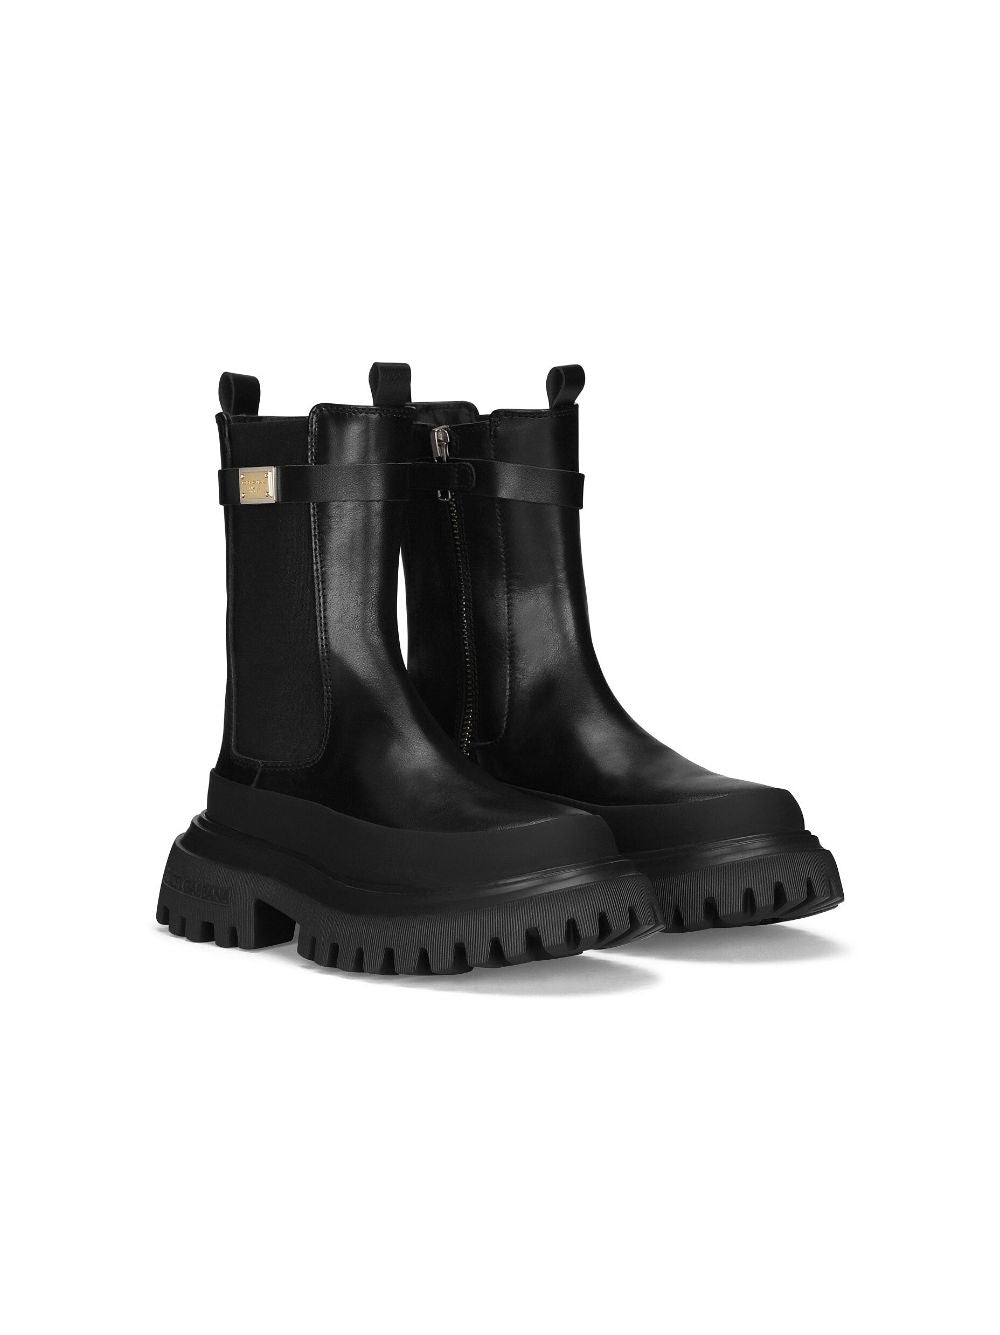 Black leather boots for girls